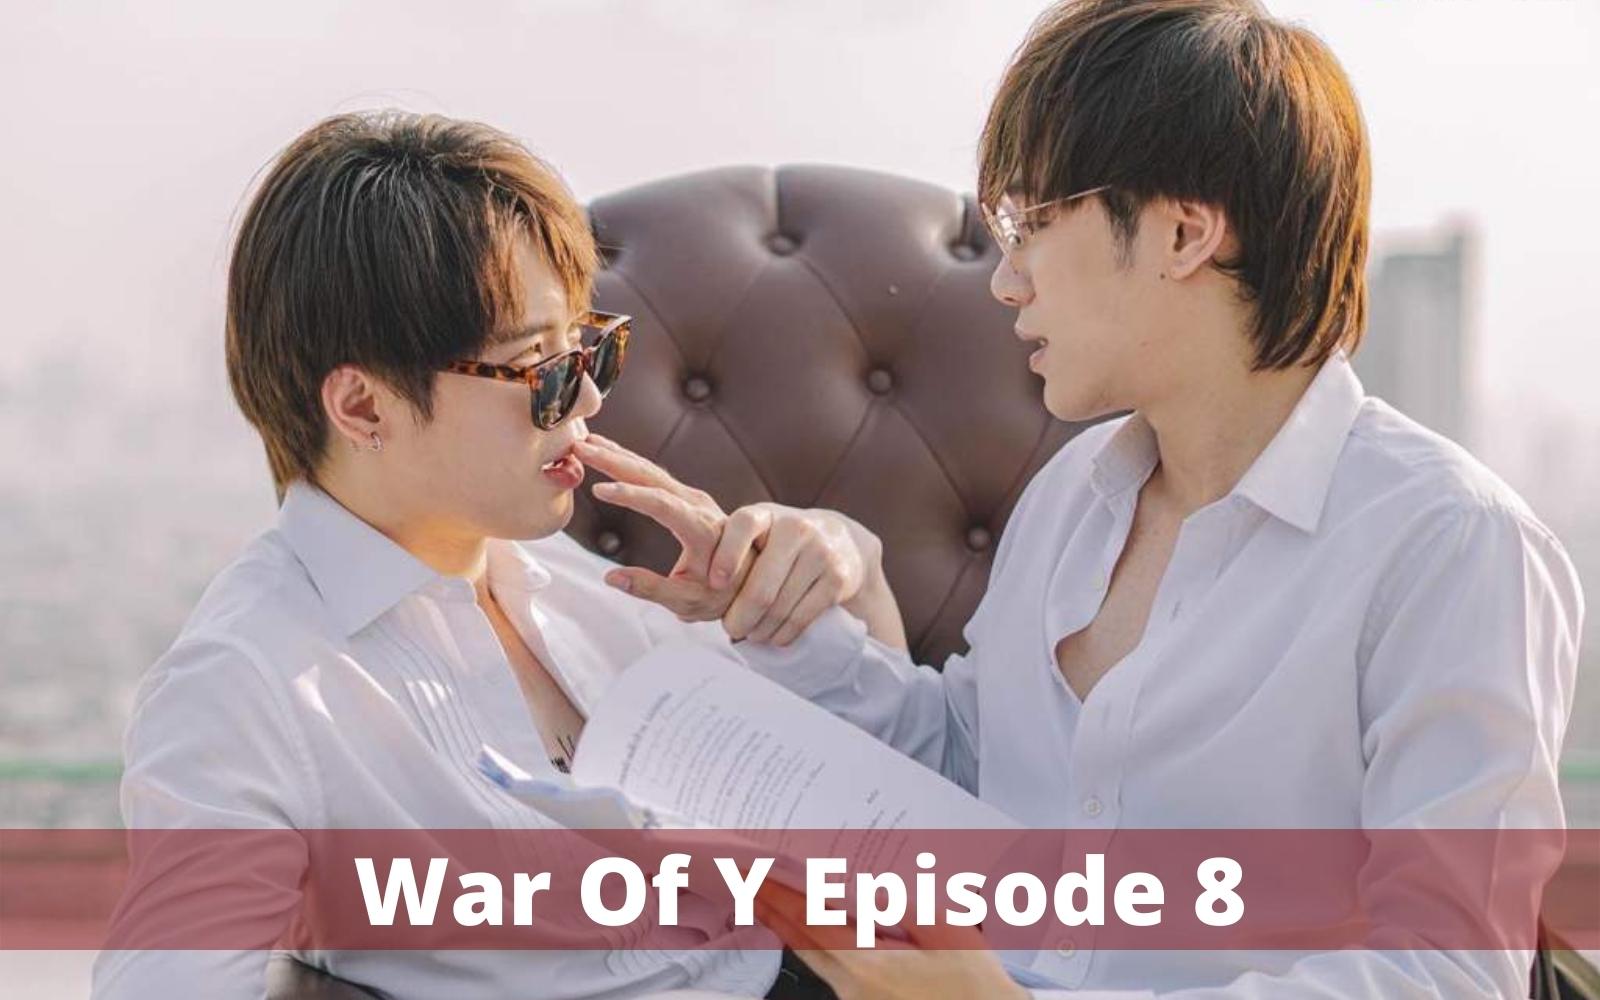 War of Y Episode 8 Coming Out? Release Date & Time, Trailer, Cast, Recap and Spoiler Everything You Need to Know